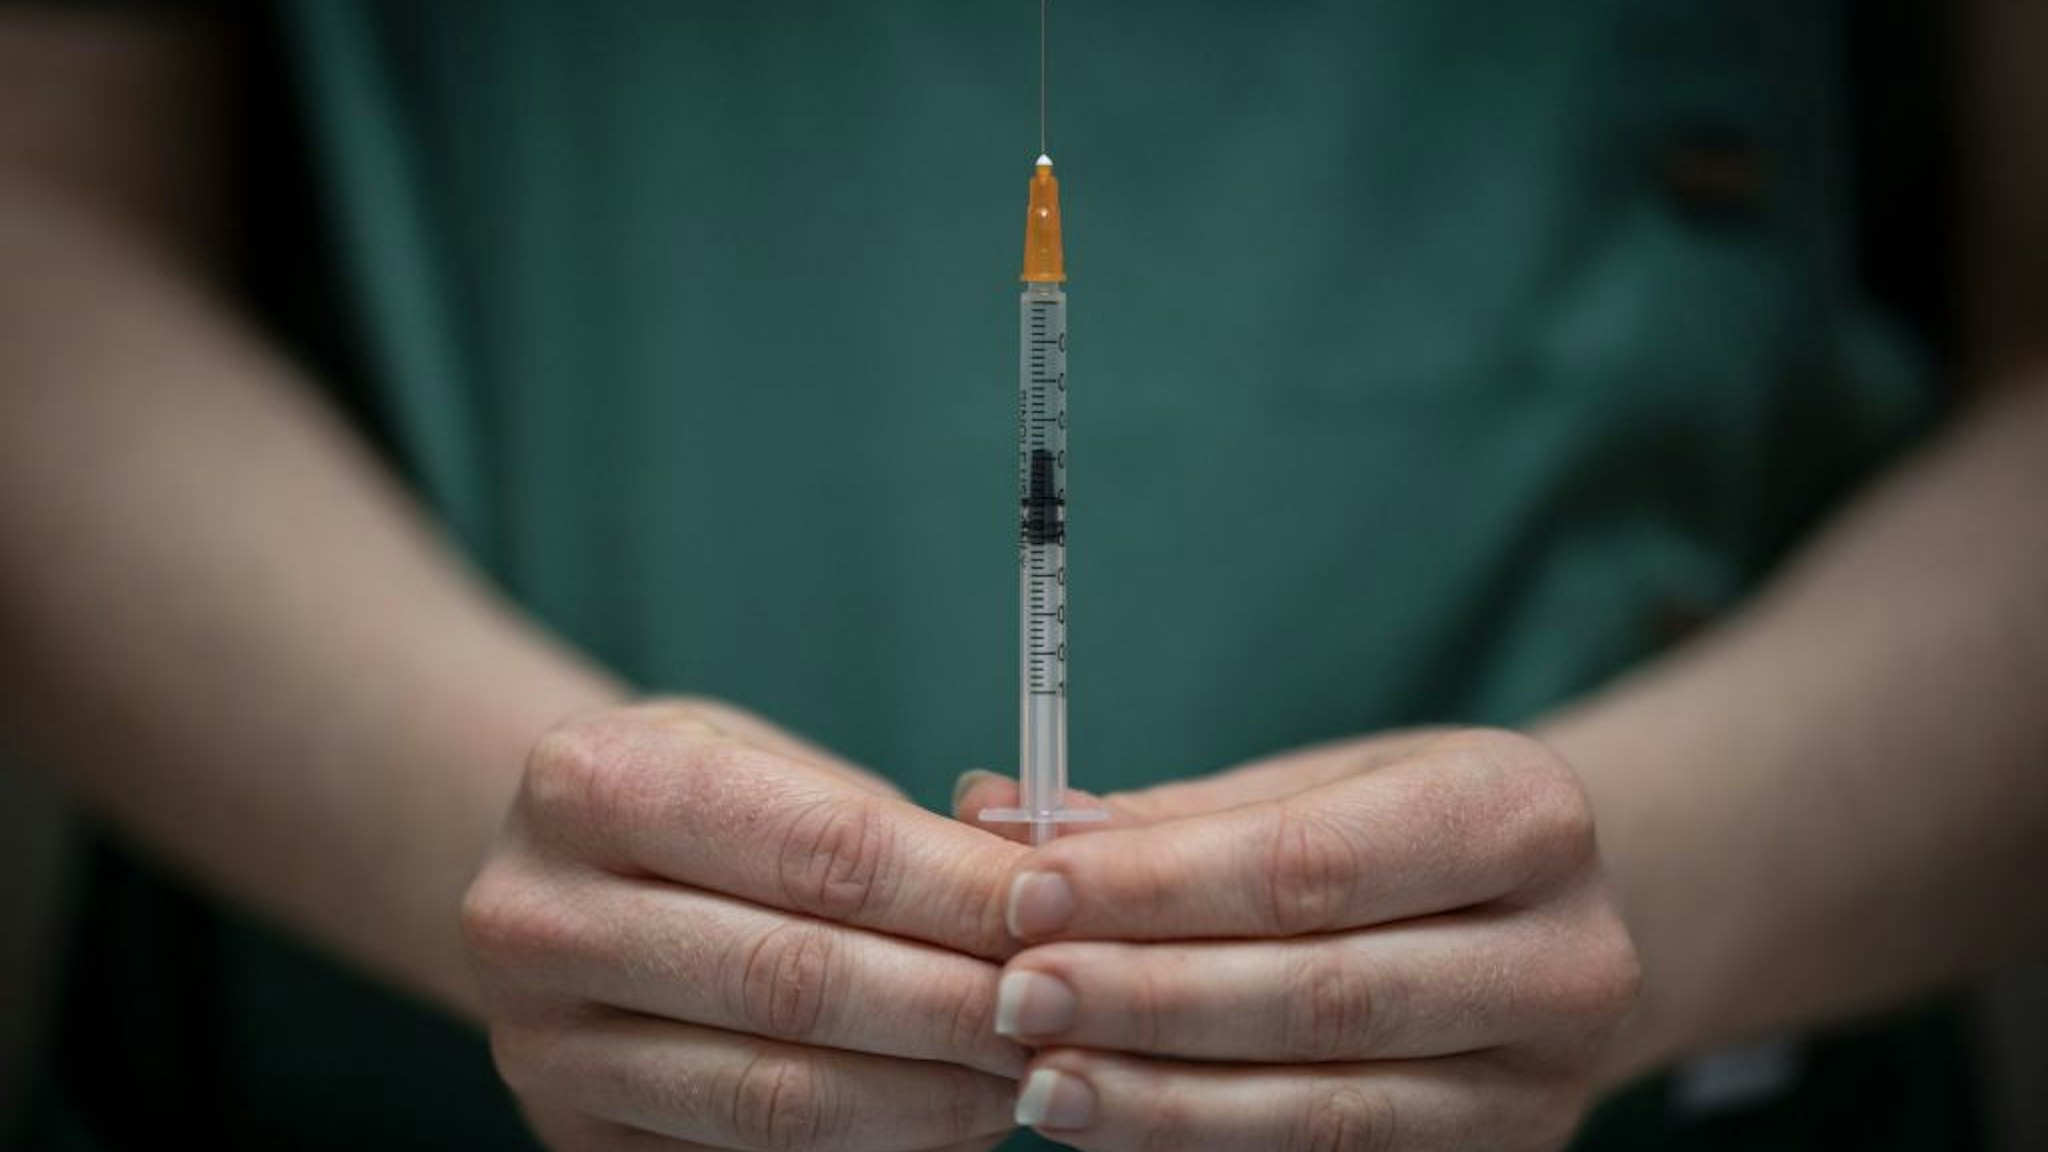 A pharmacist prepares a dose of the AstraZeneca/Oxford Covid-19 vaccine with a syringe in a pharmacy, in Savenay, western France, on April 2, 2021. (Photo by LOIC VENANCE / AFP) (Photo by LOIC VENANCE/AFP via Getty Images)